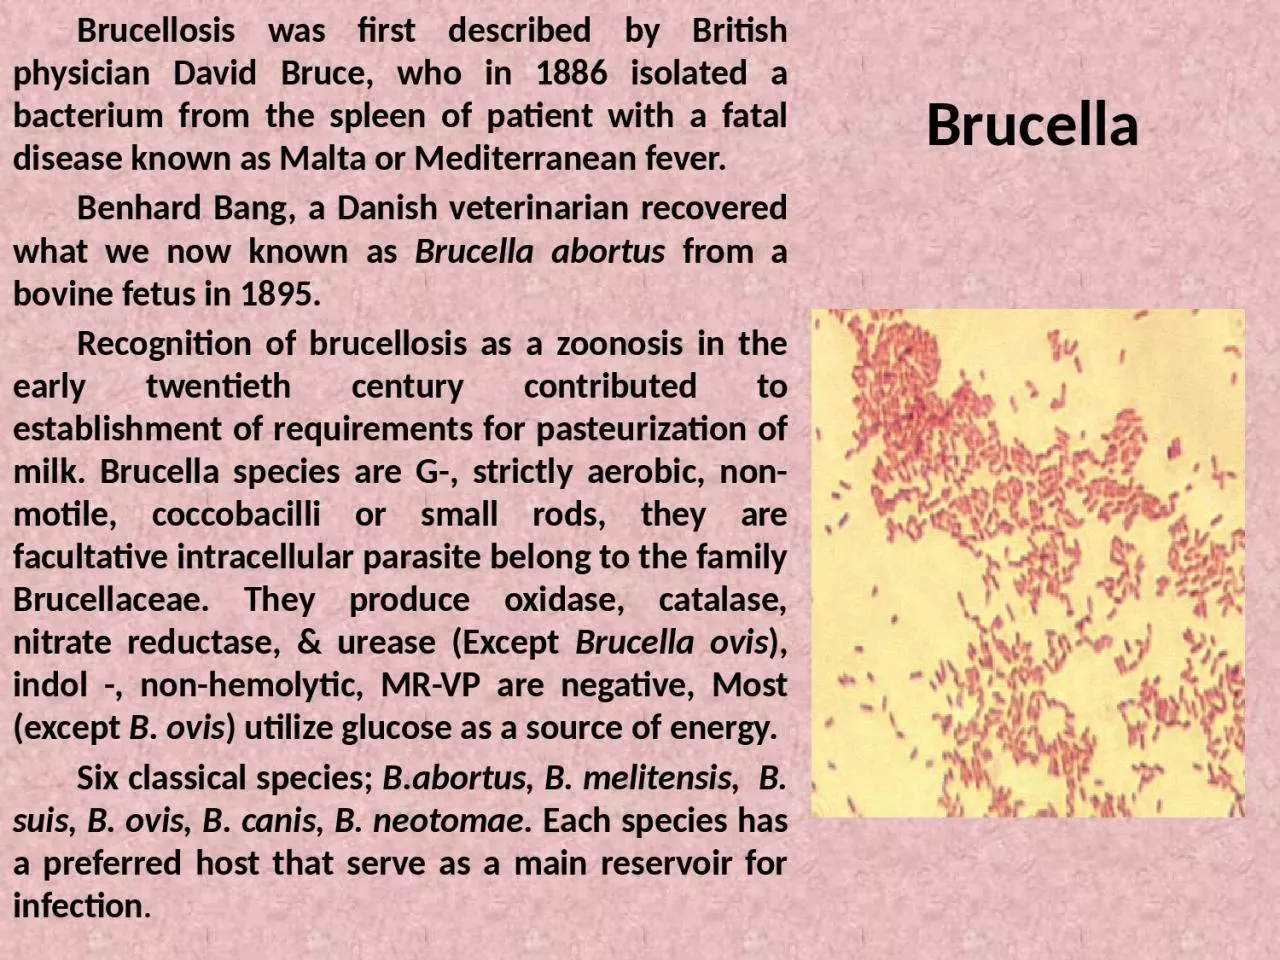 Brucella 	Brucellosis was first described by British physician David Bruce, who in 1886